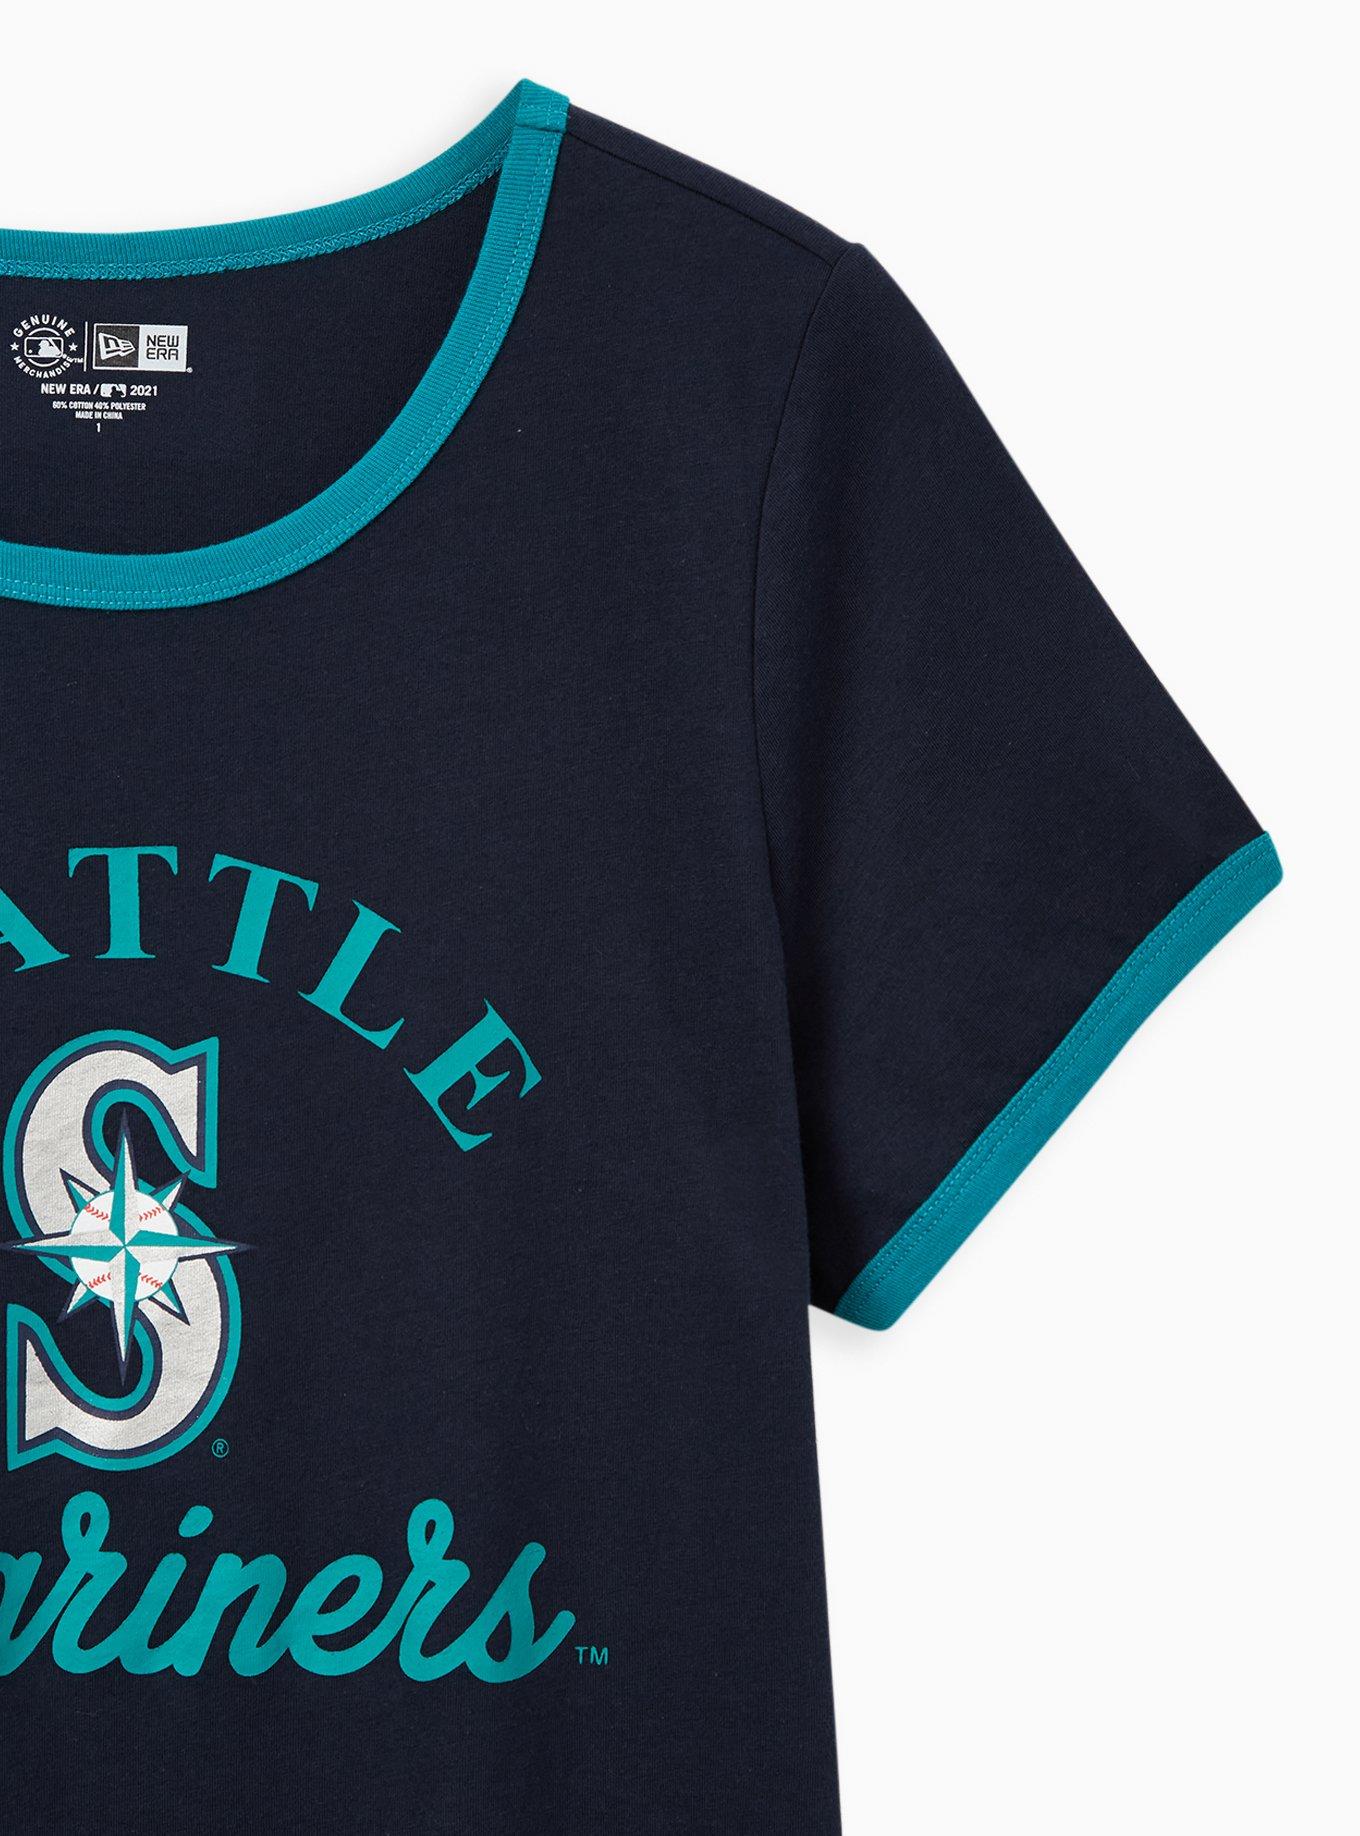 Plus Size - Classic Fit Ringer Tee - MLB Seattle Mariners Navy